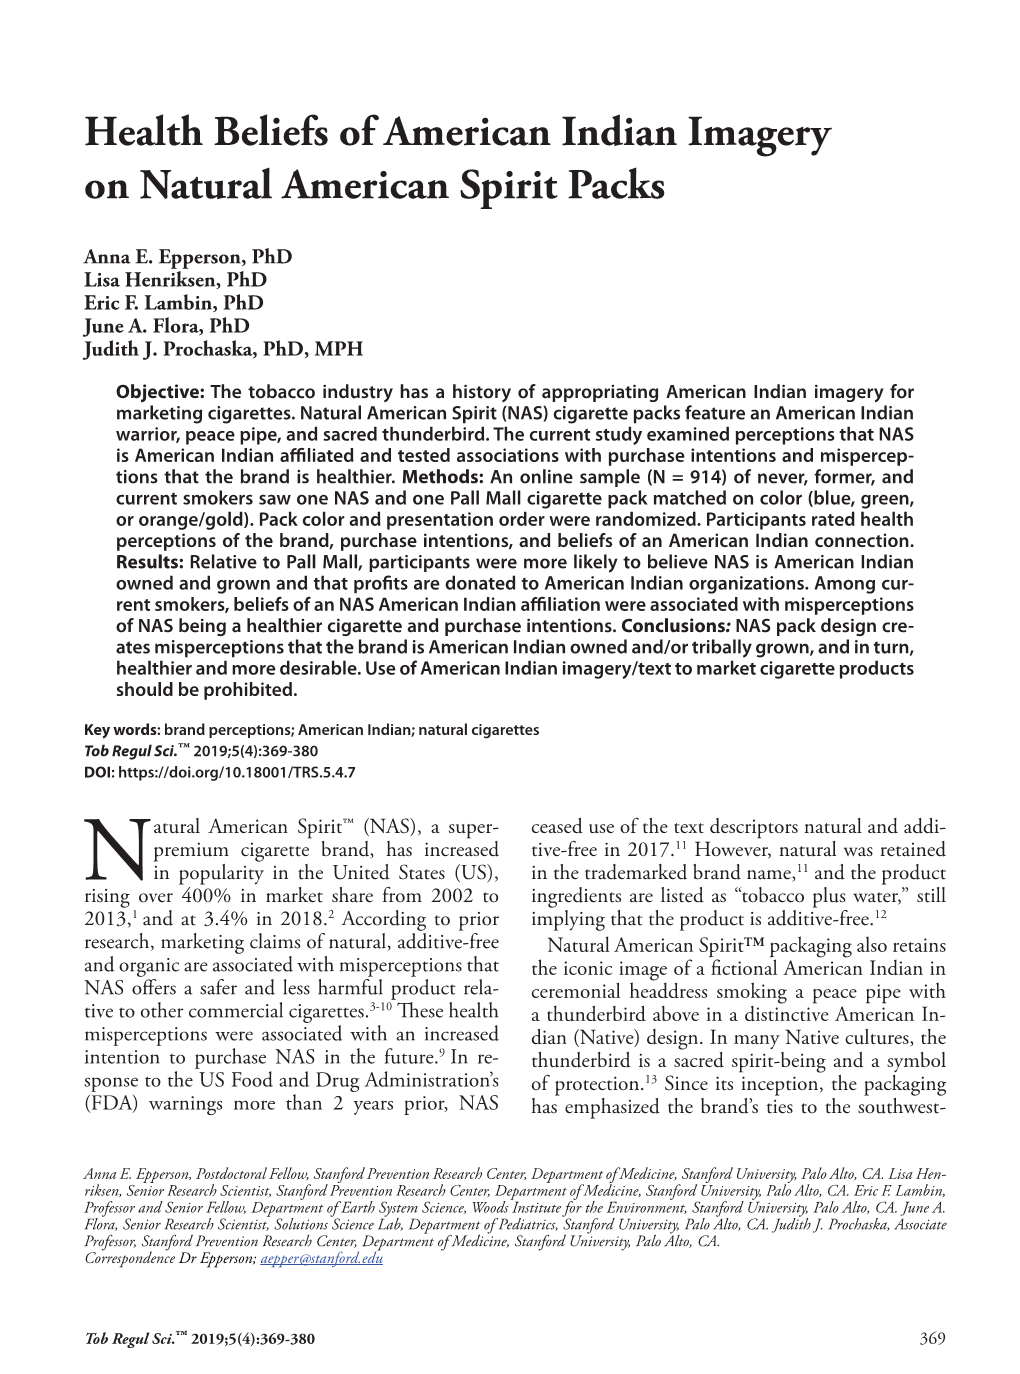 Health Beliefs of American Indian Imagery on Natural American Spirit Packs